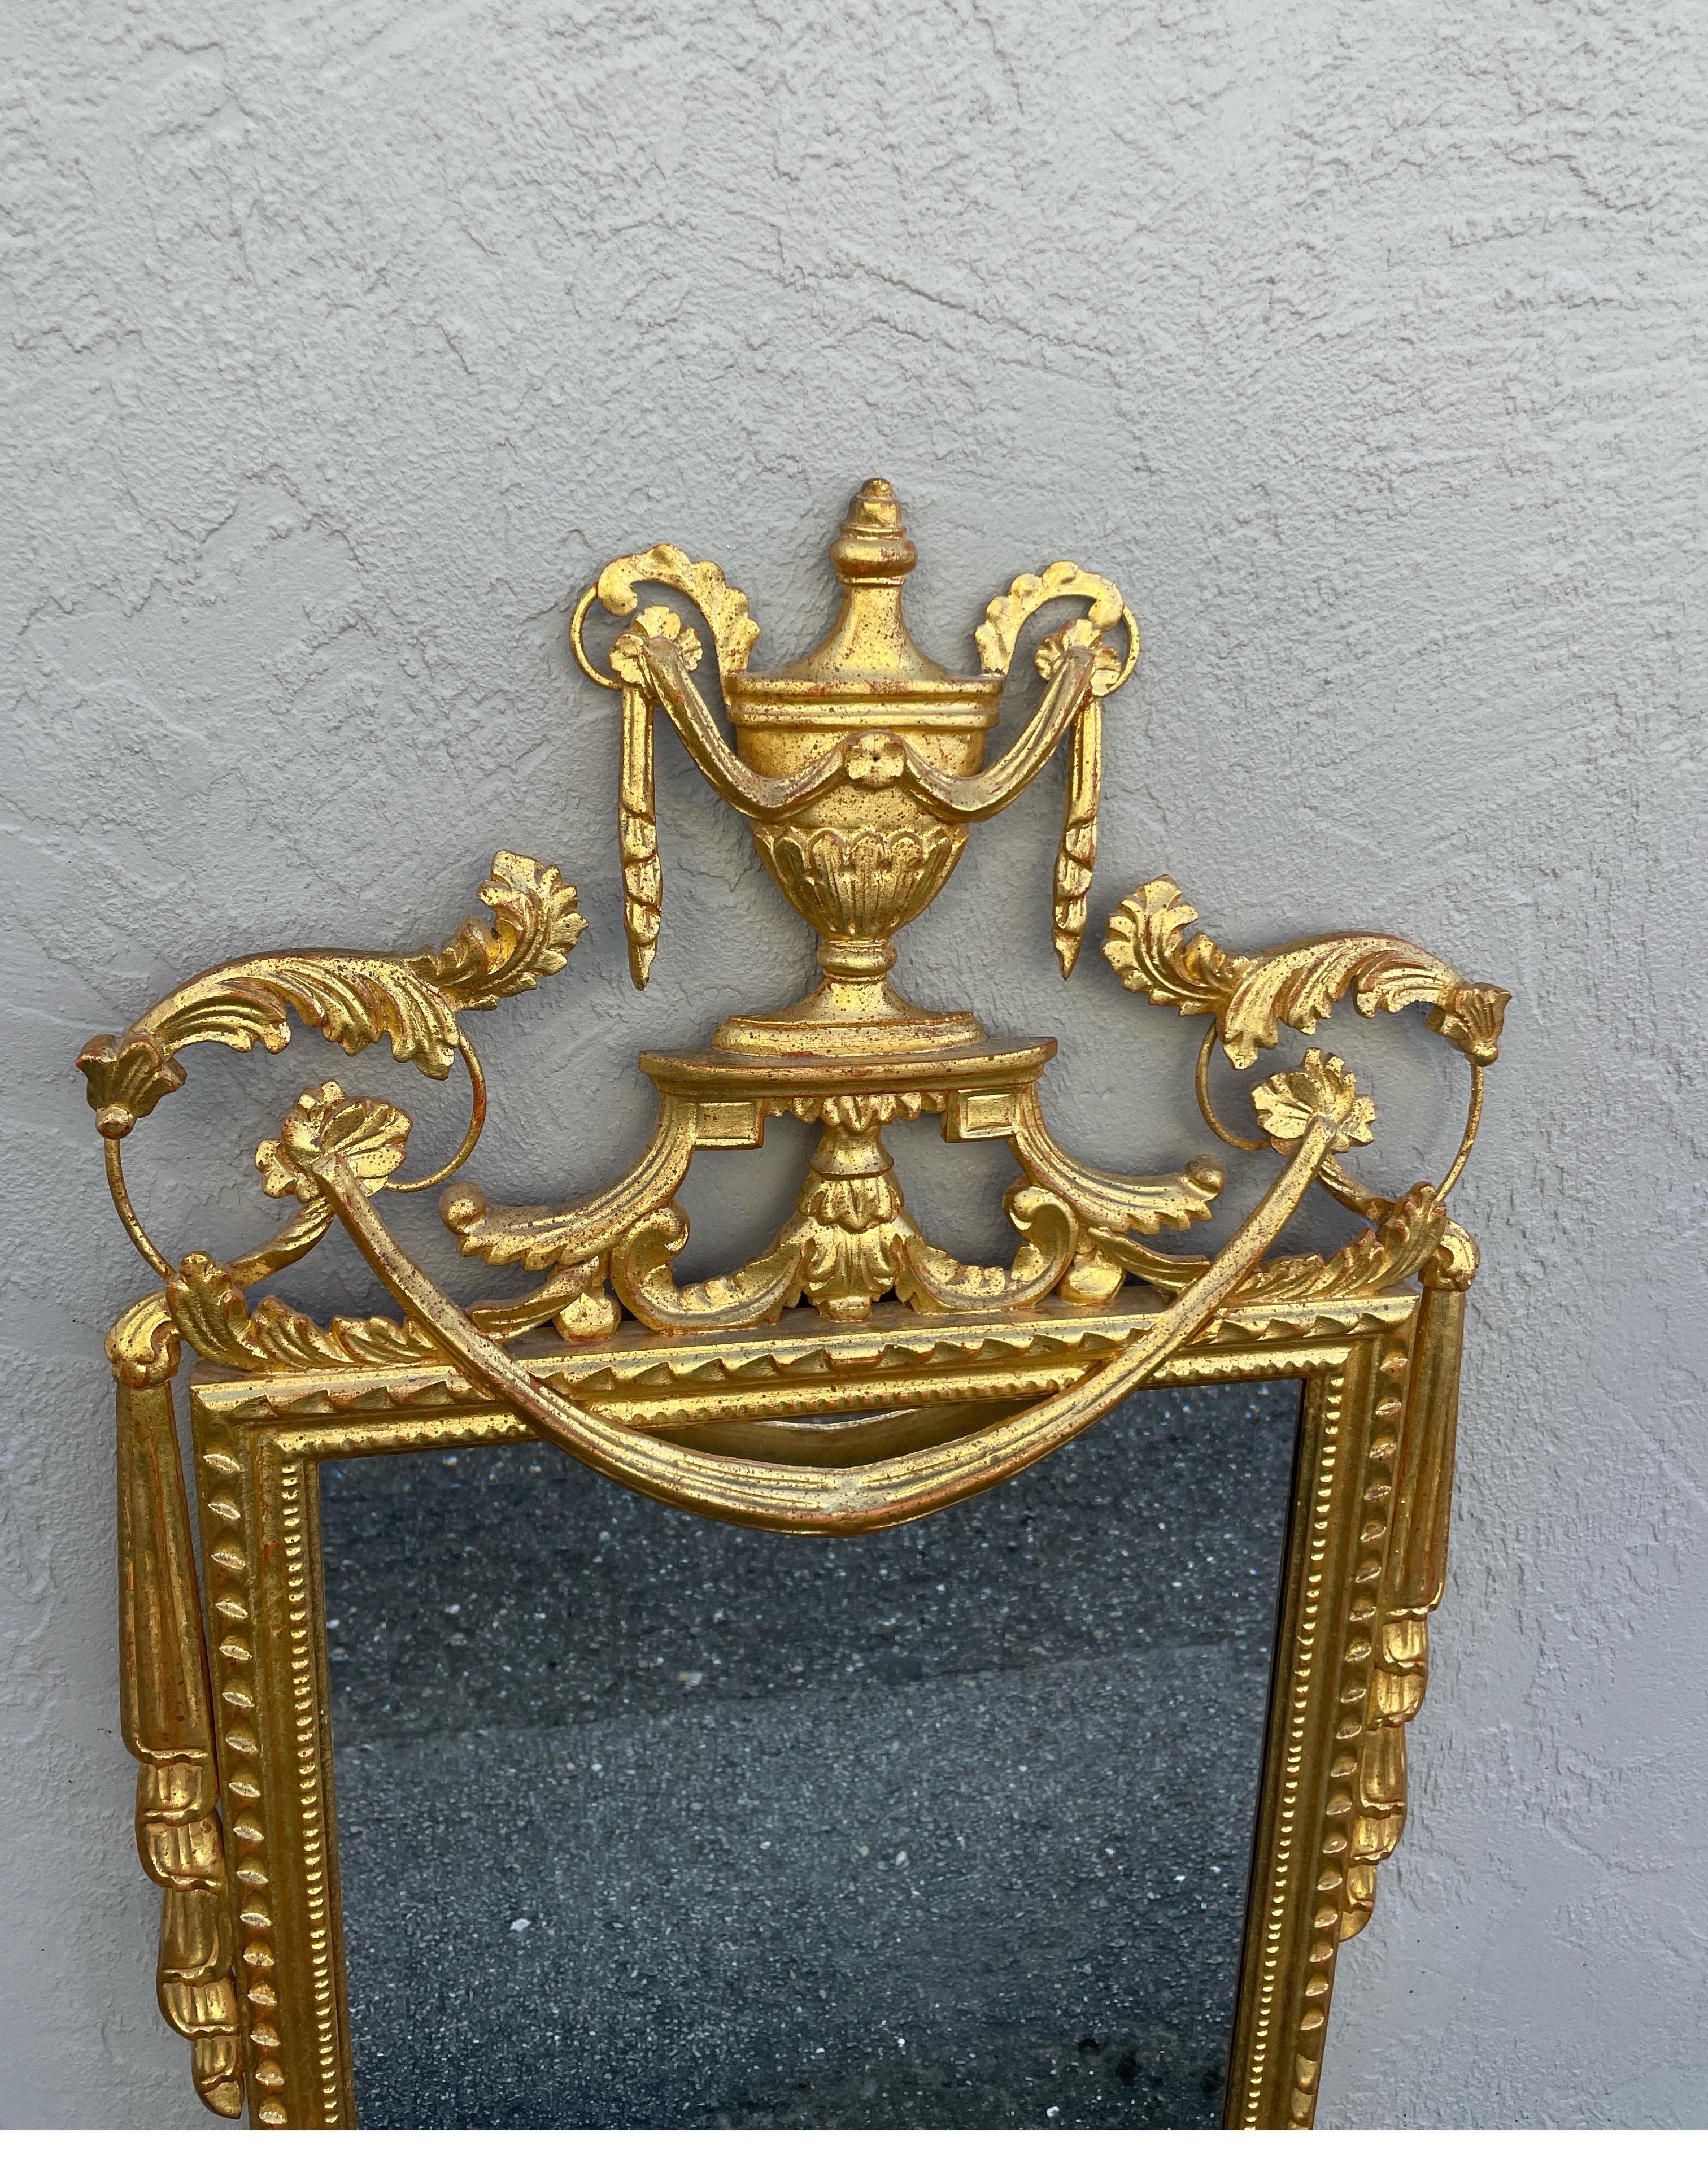 Neoclassical giltwood Italian wall mirror by Le Barge. Beautifully detailed with a large Urn at top and swags adorning each side.